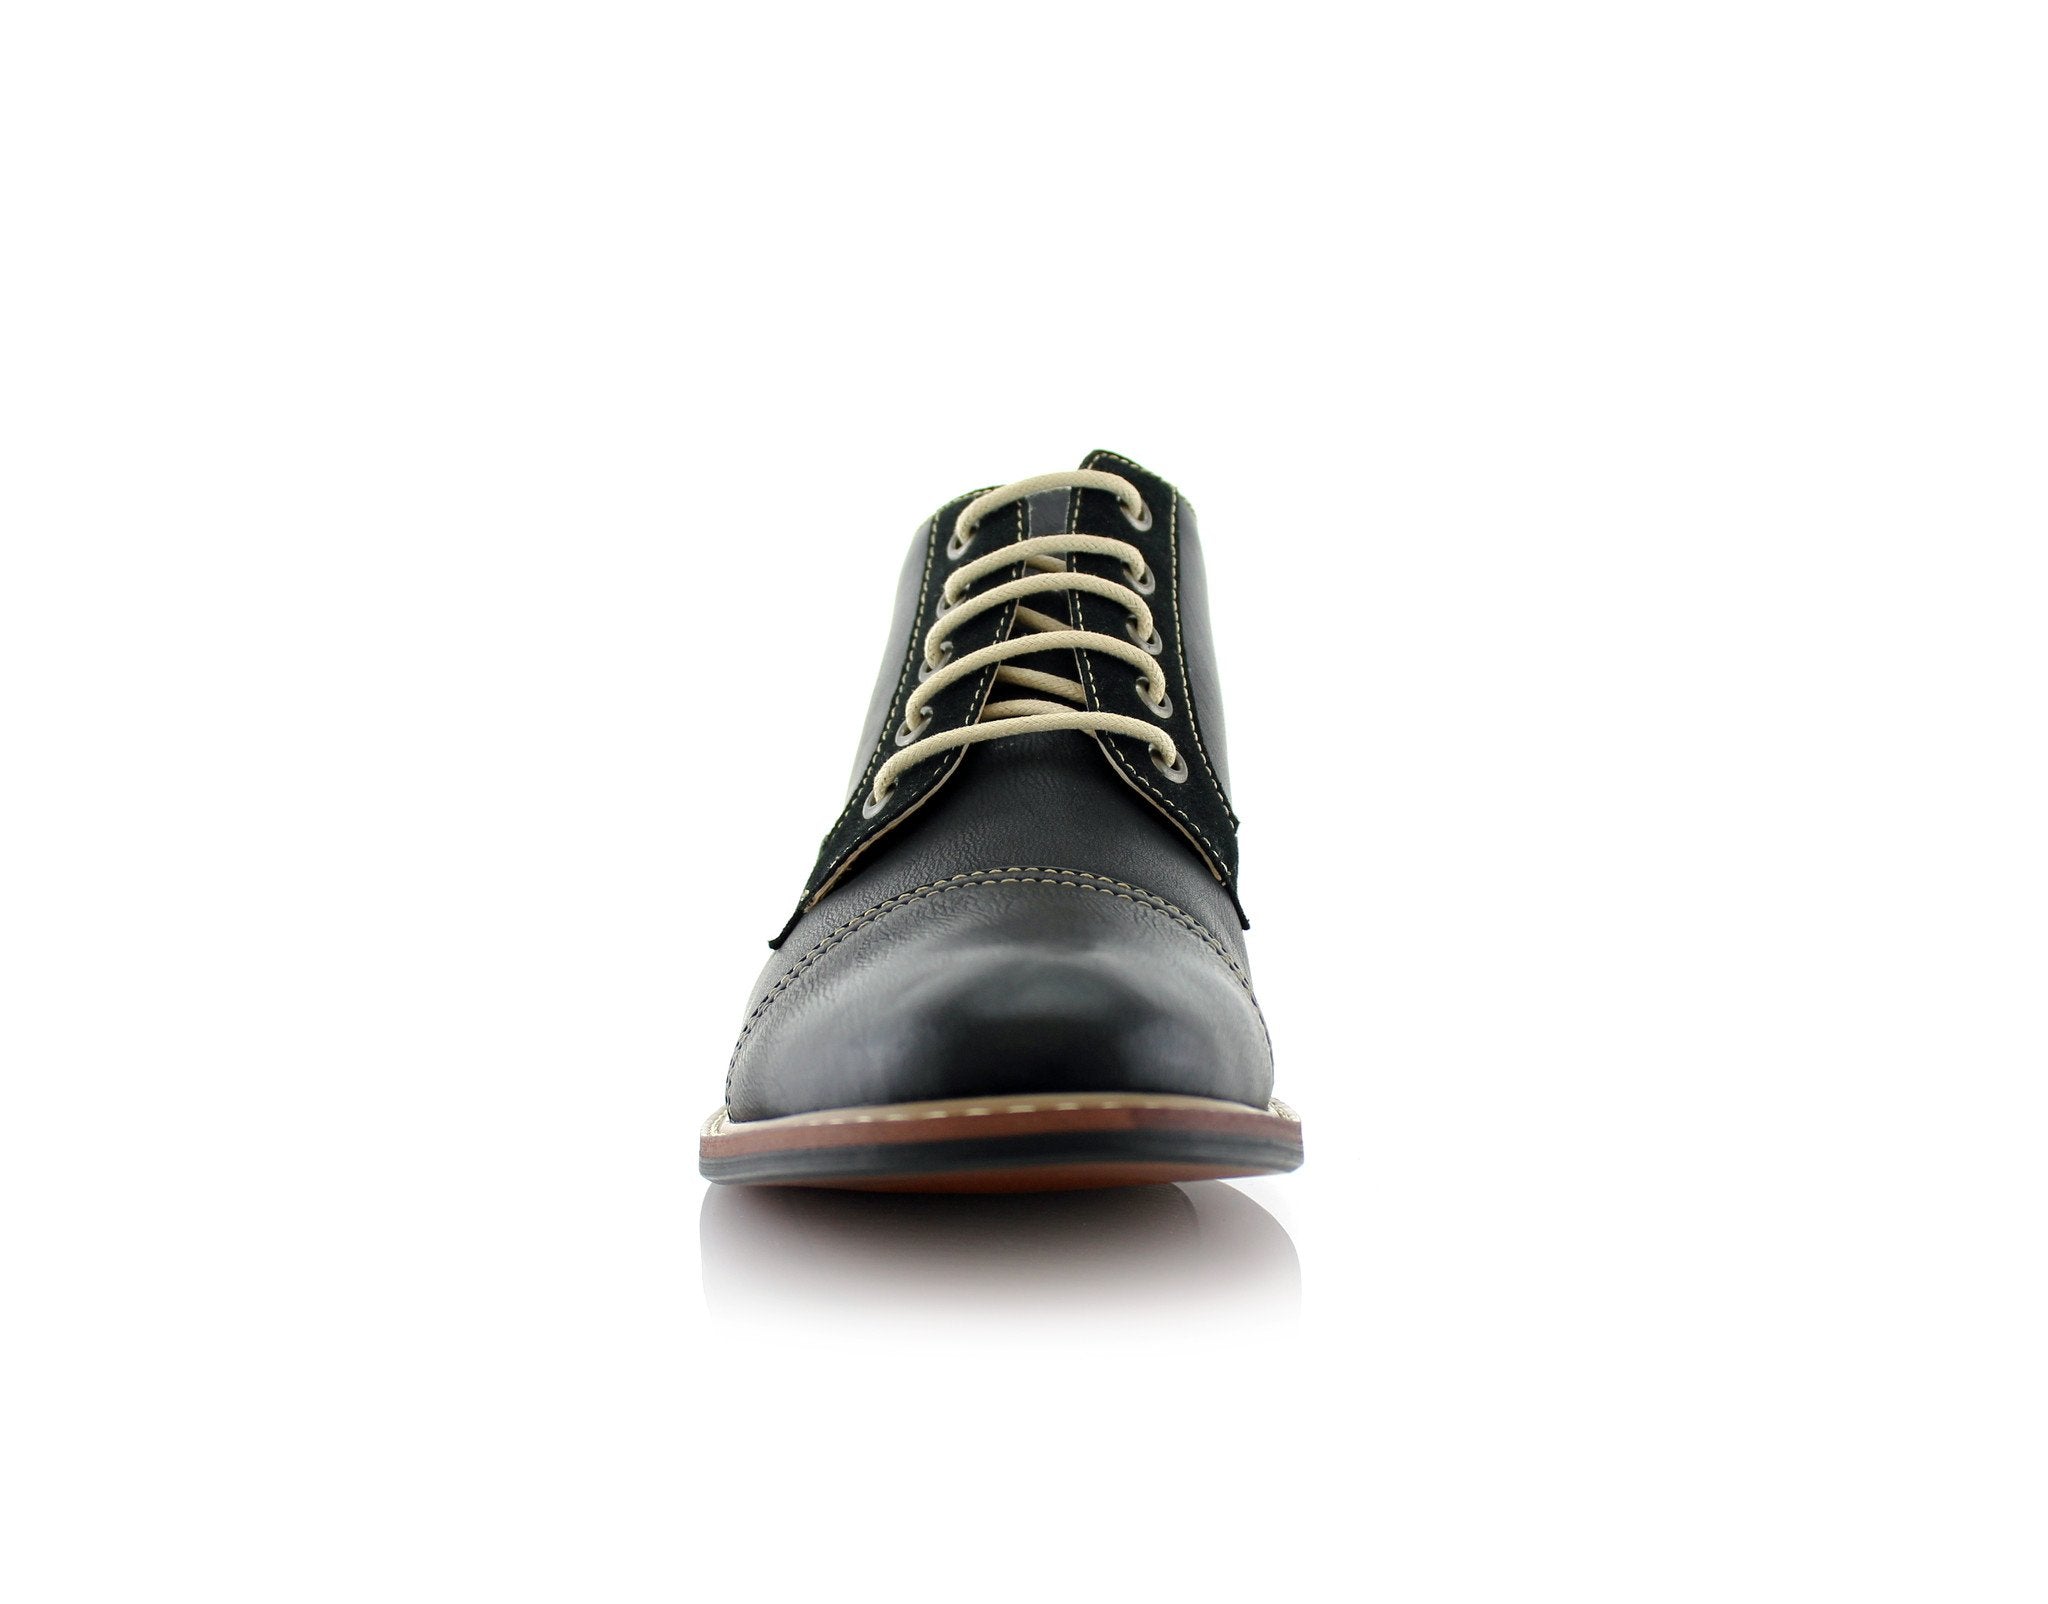 Duo-Textured Ankle Derby Boots | Eli by Ferro Aldo | Conal Footwear | Front Angle View